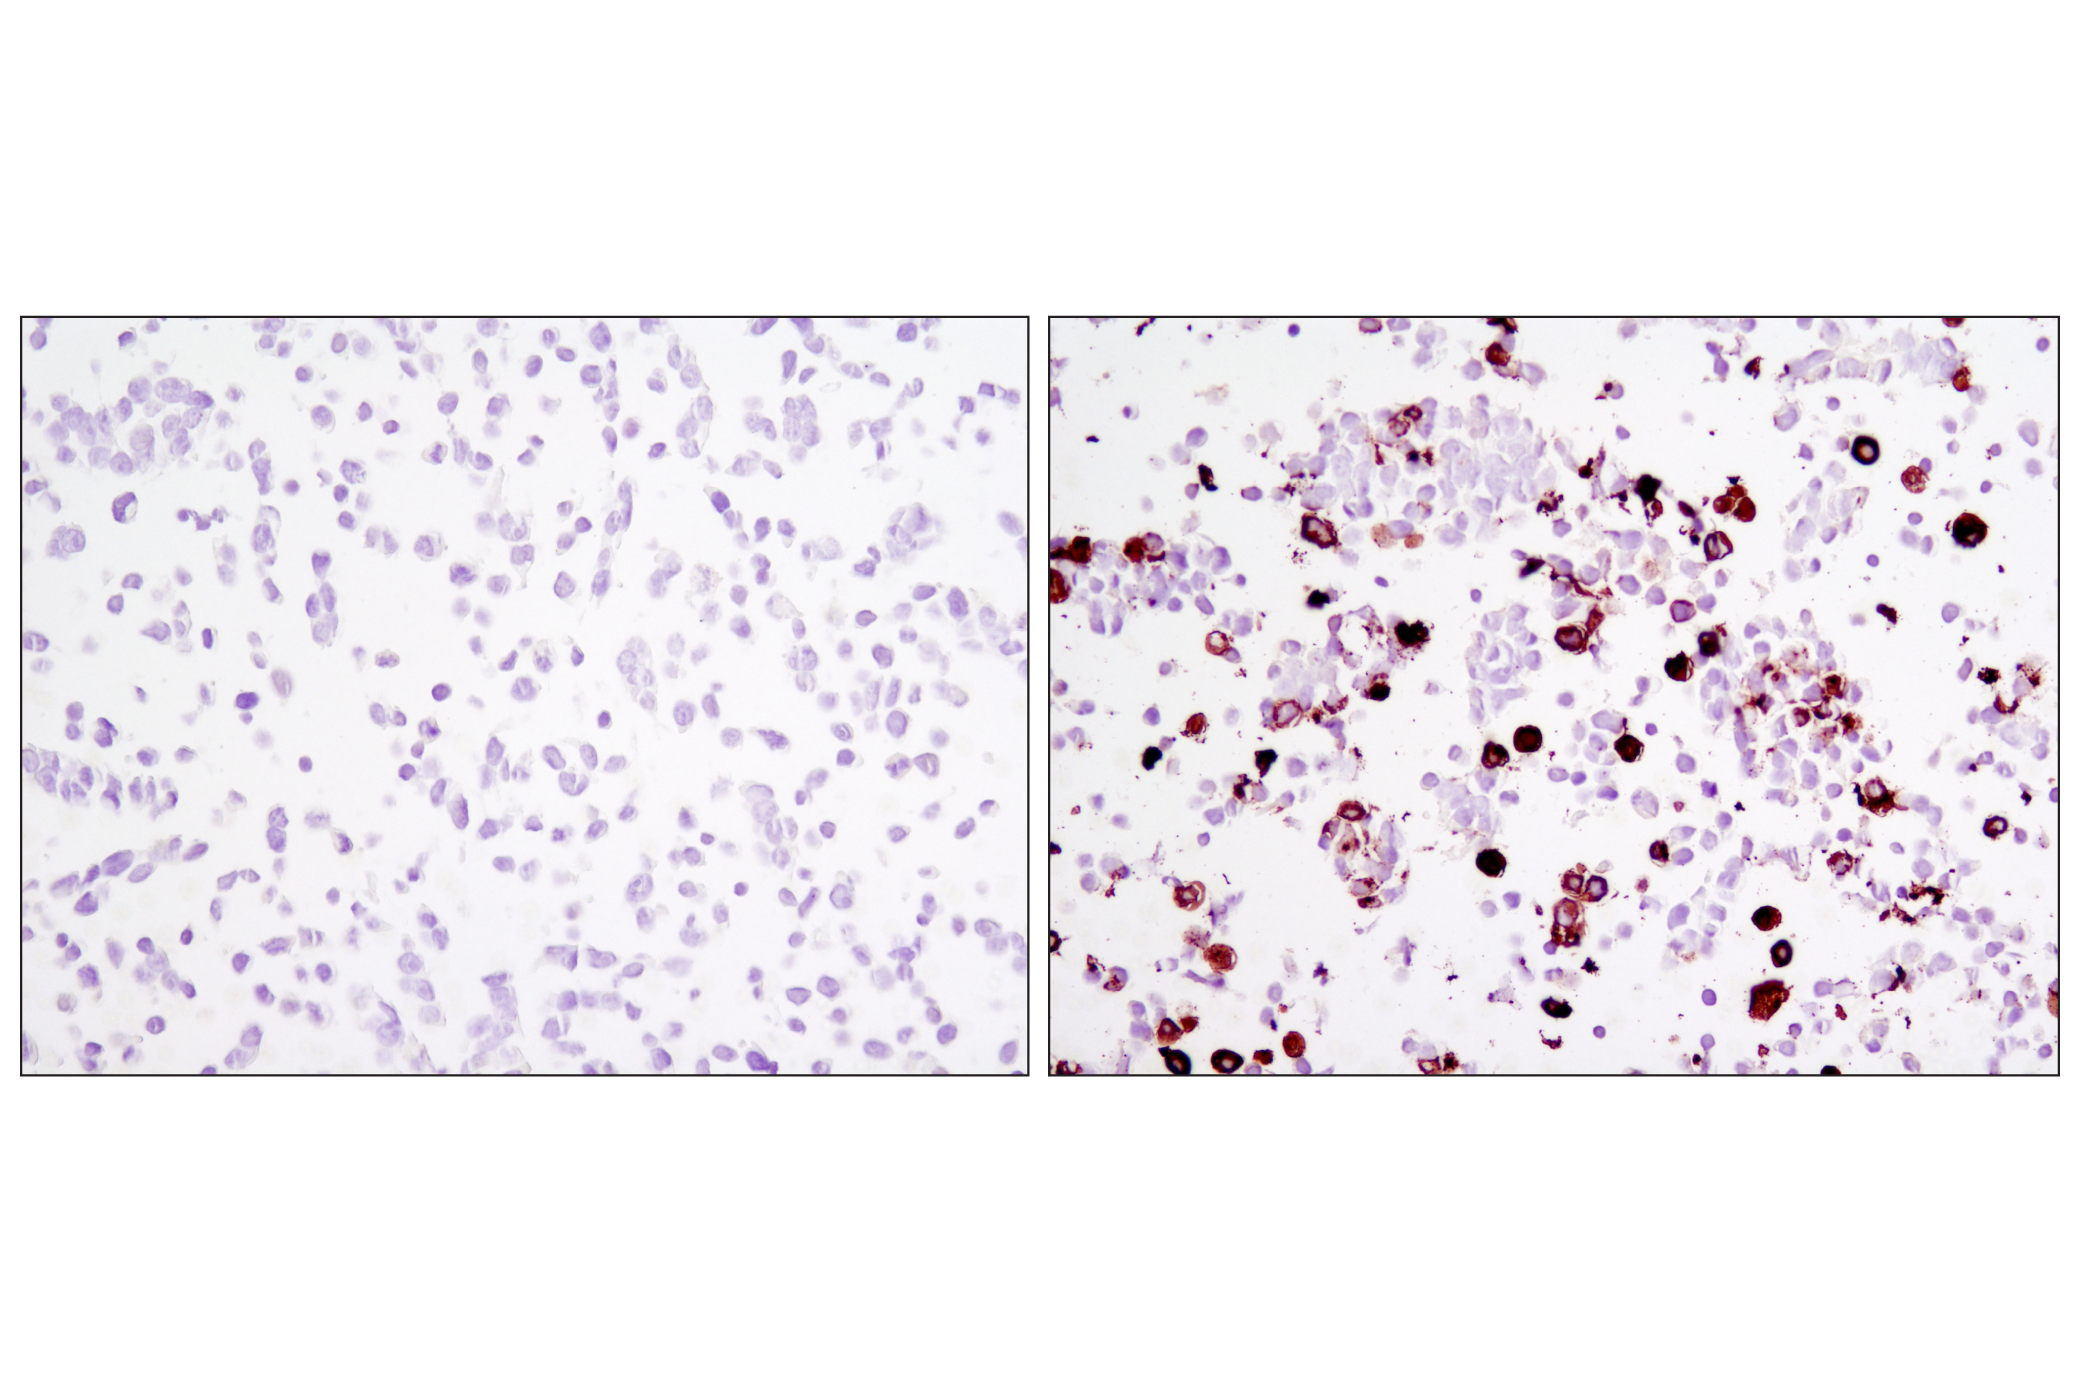 Immunohistochemistry Image 1: DYKDDDDK Tag (9A3) Mouse mAb (Binds to same epitope as Sigma-Aldrich Anti-FLAG M2 antibody) (BSA and Azide Free)